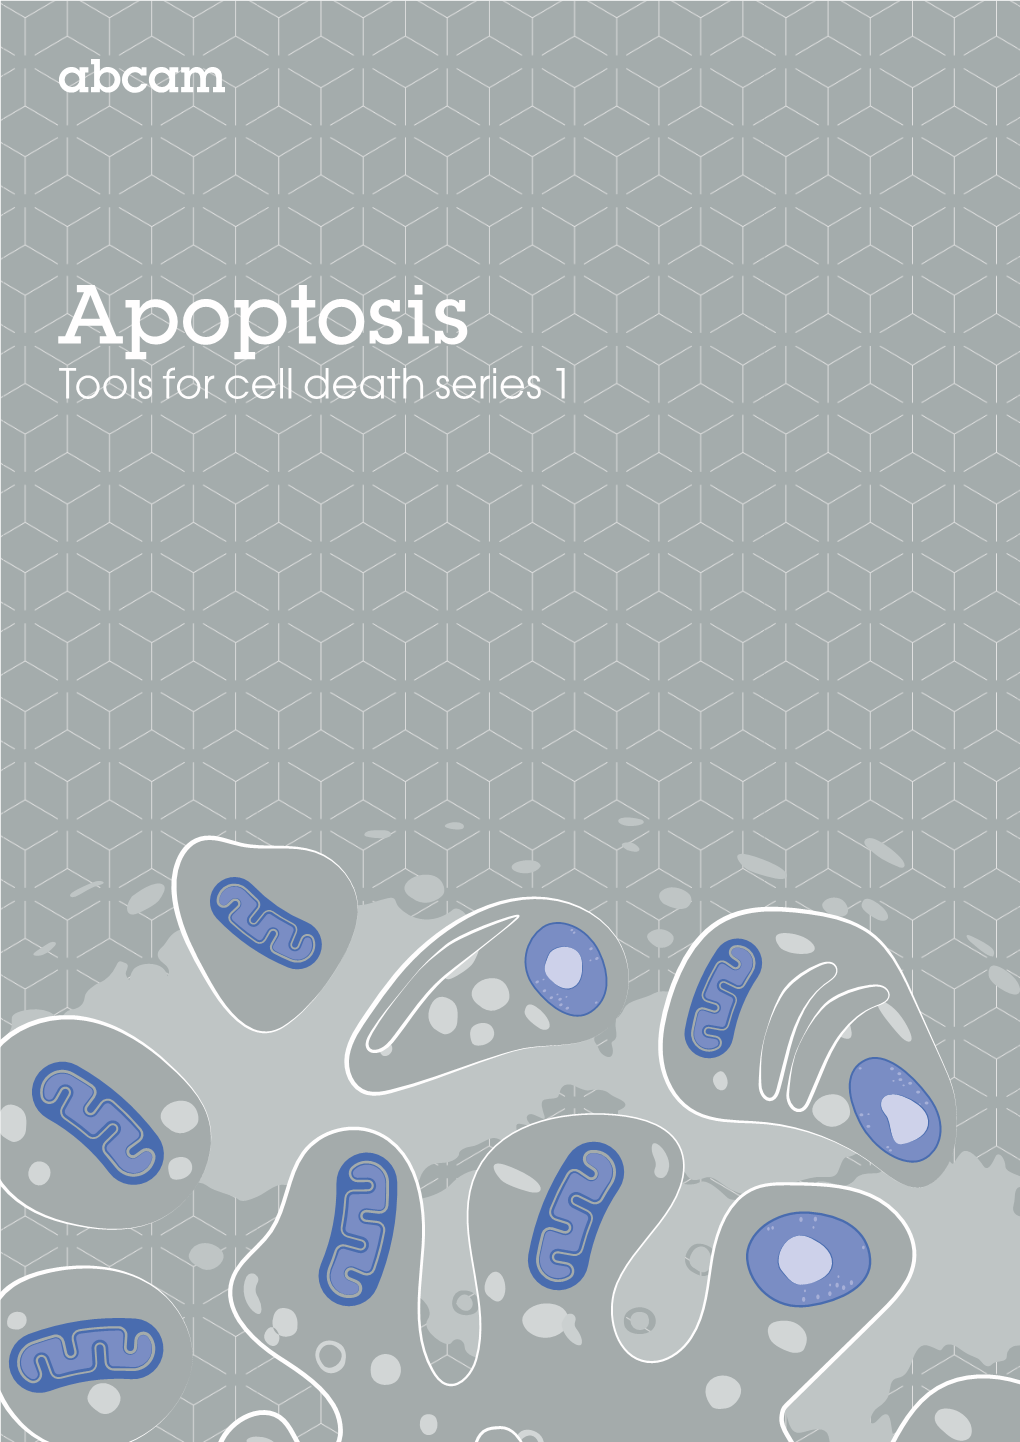 Apoptosis Tools for Cell Death Series 1 Contents